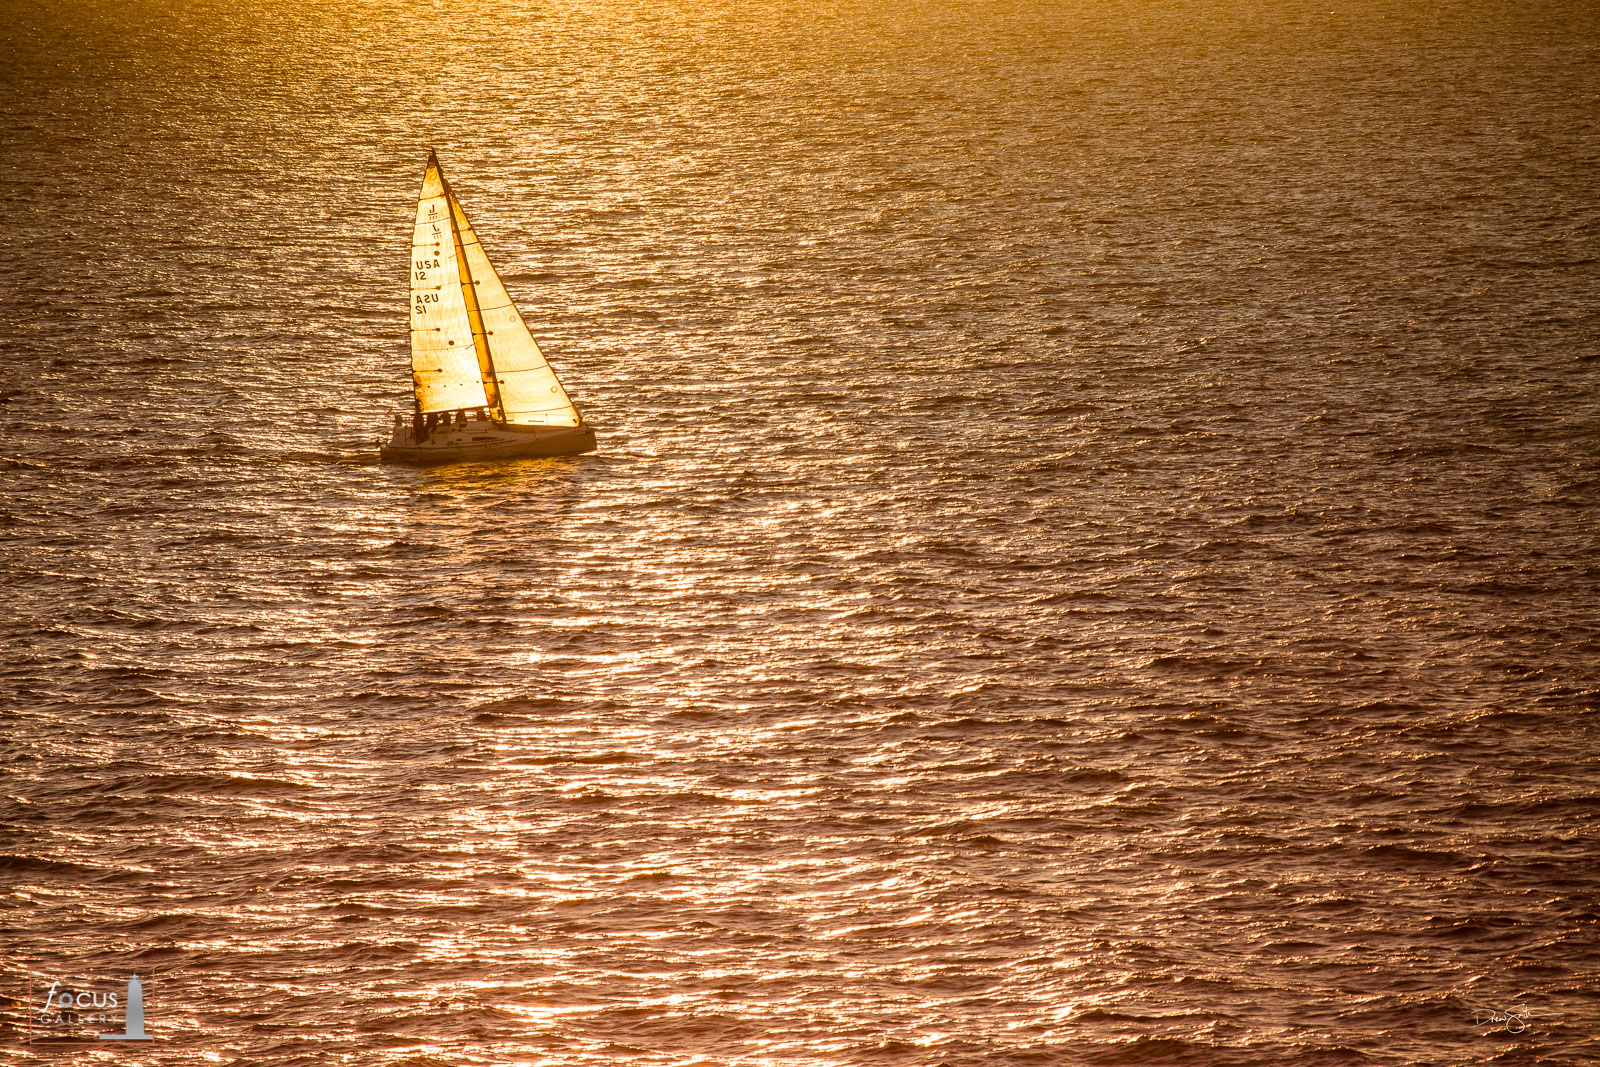 Backlit sailboat participating in the Chicago to Mackinac race on Lake Michigan at sunset.